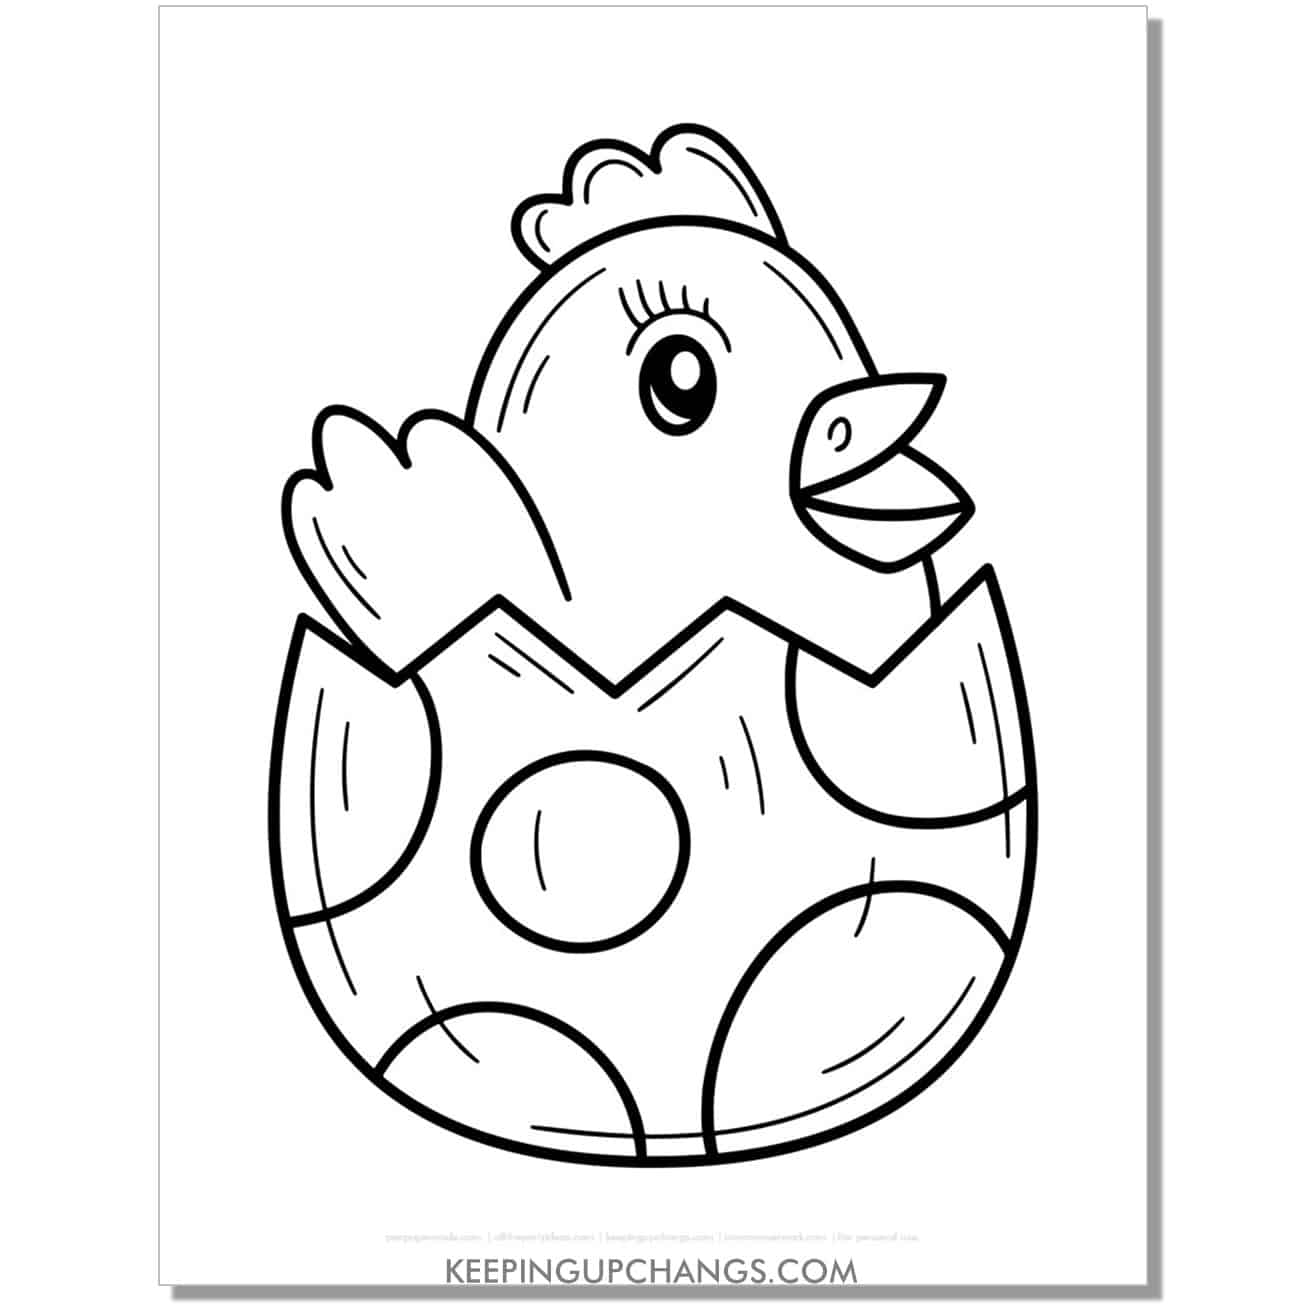 easter chick in spotted egg coloring page, sheet.